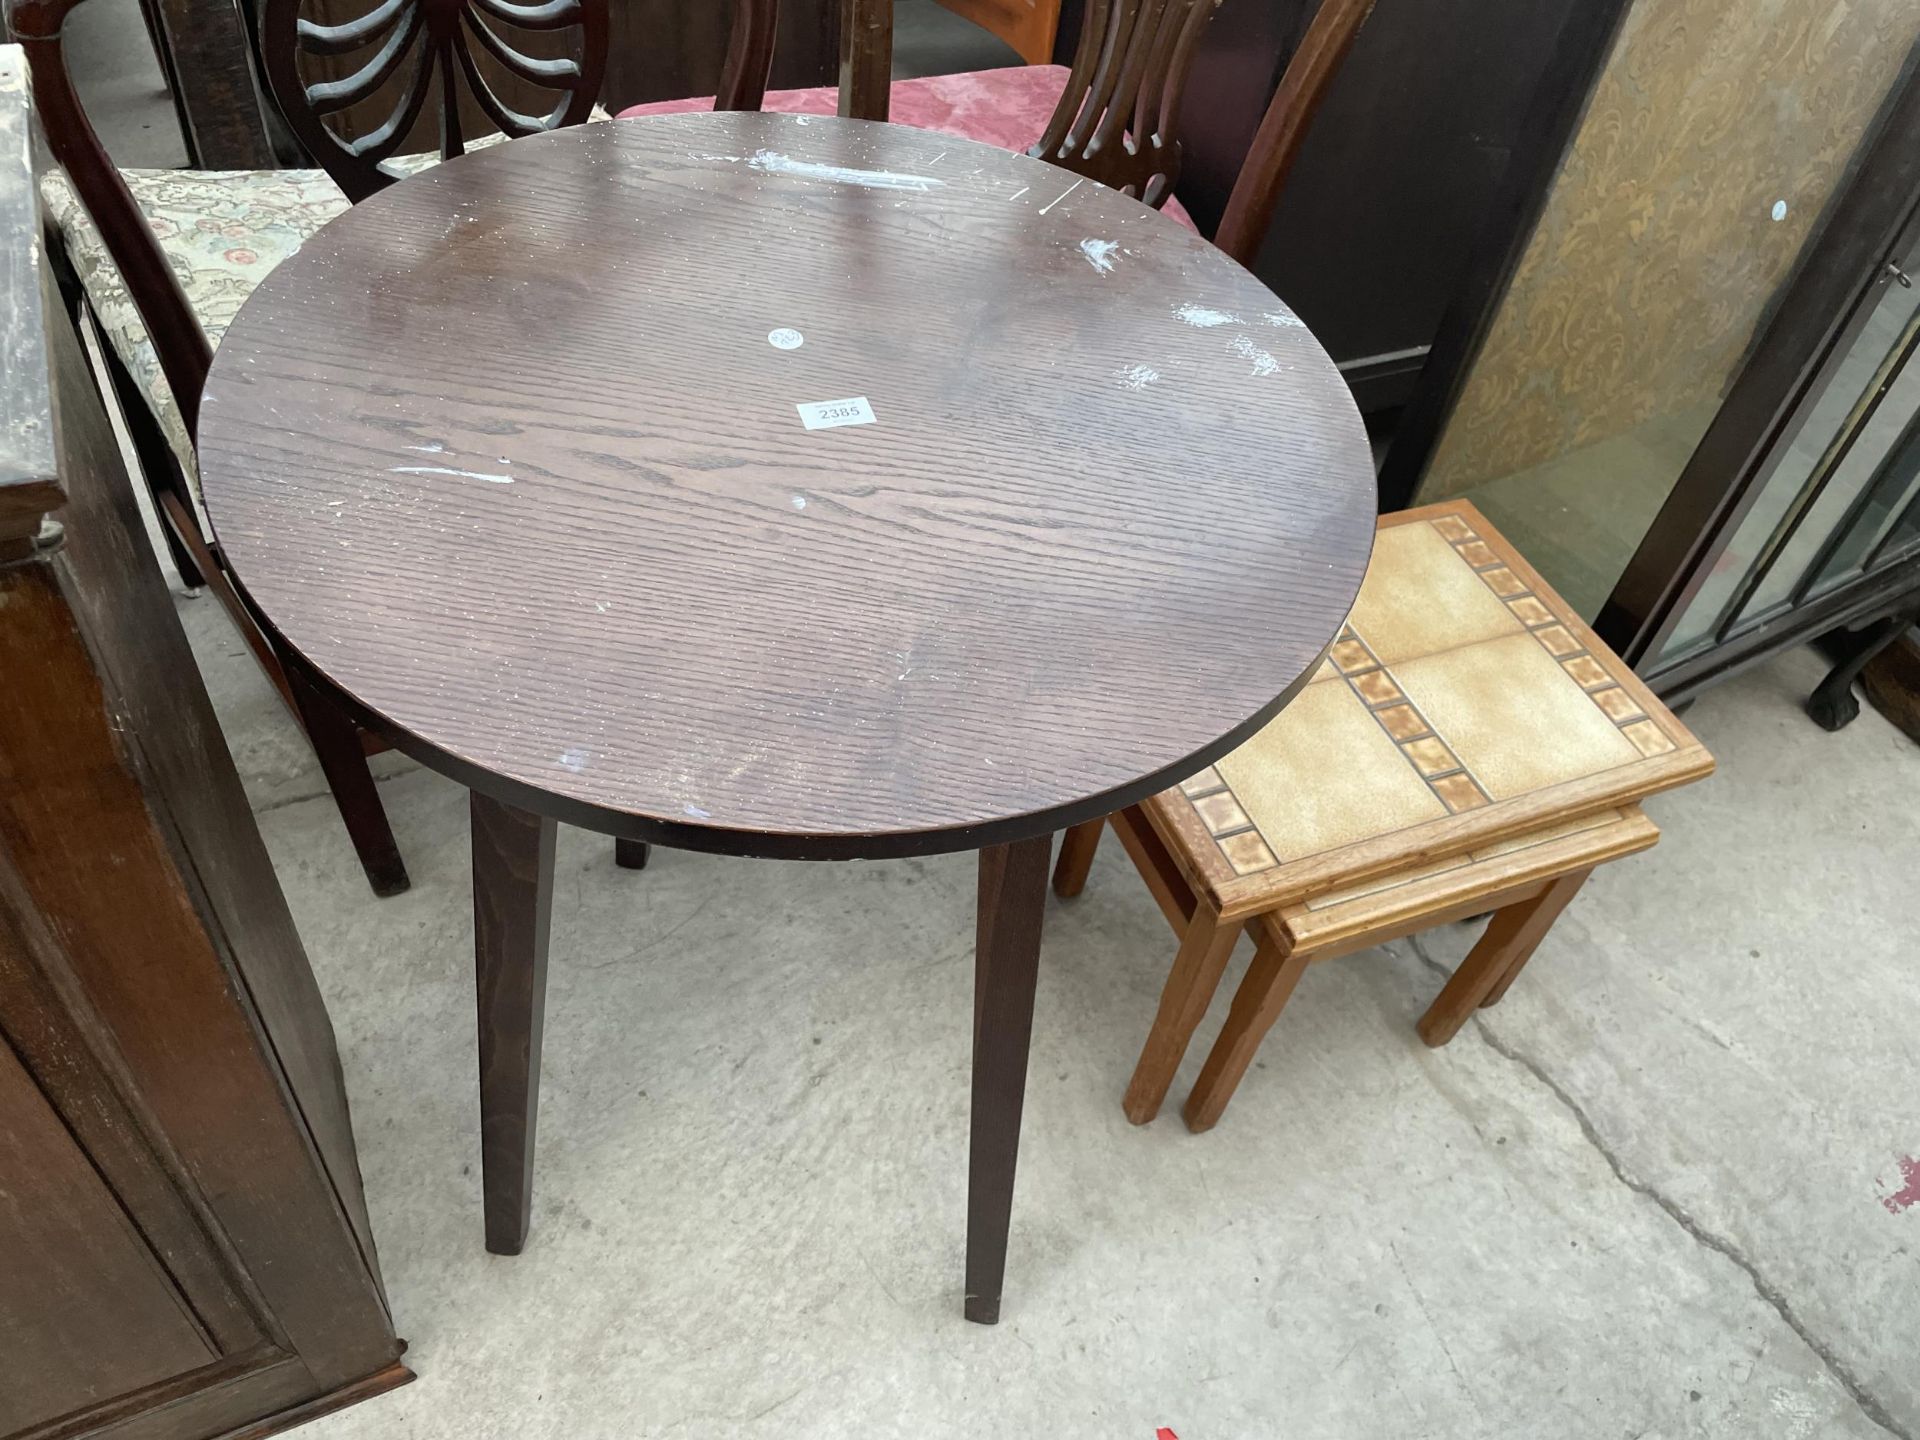 A PUB TABLE AND NEST OF TWO TABLES